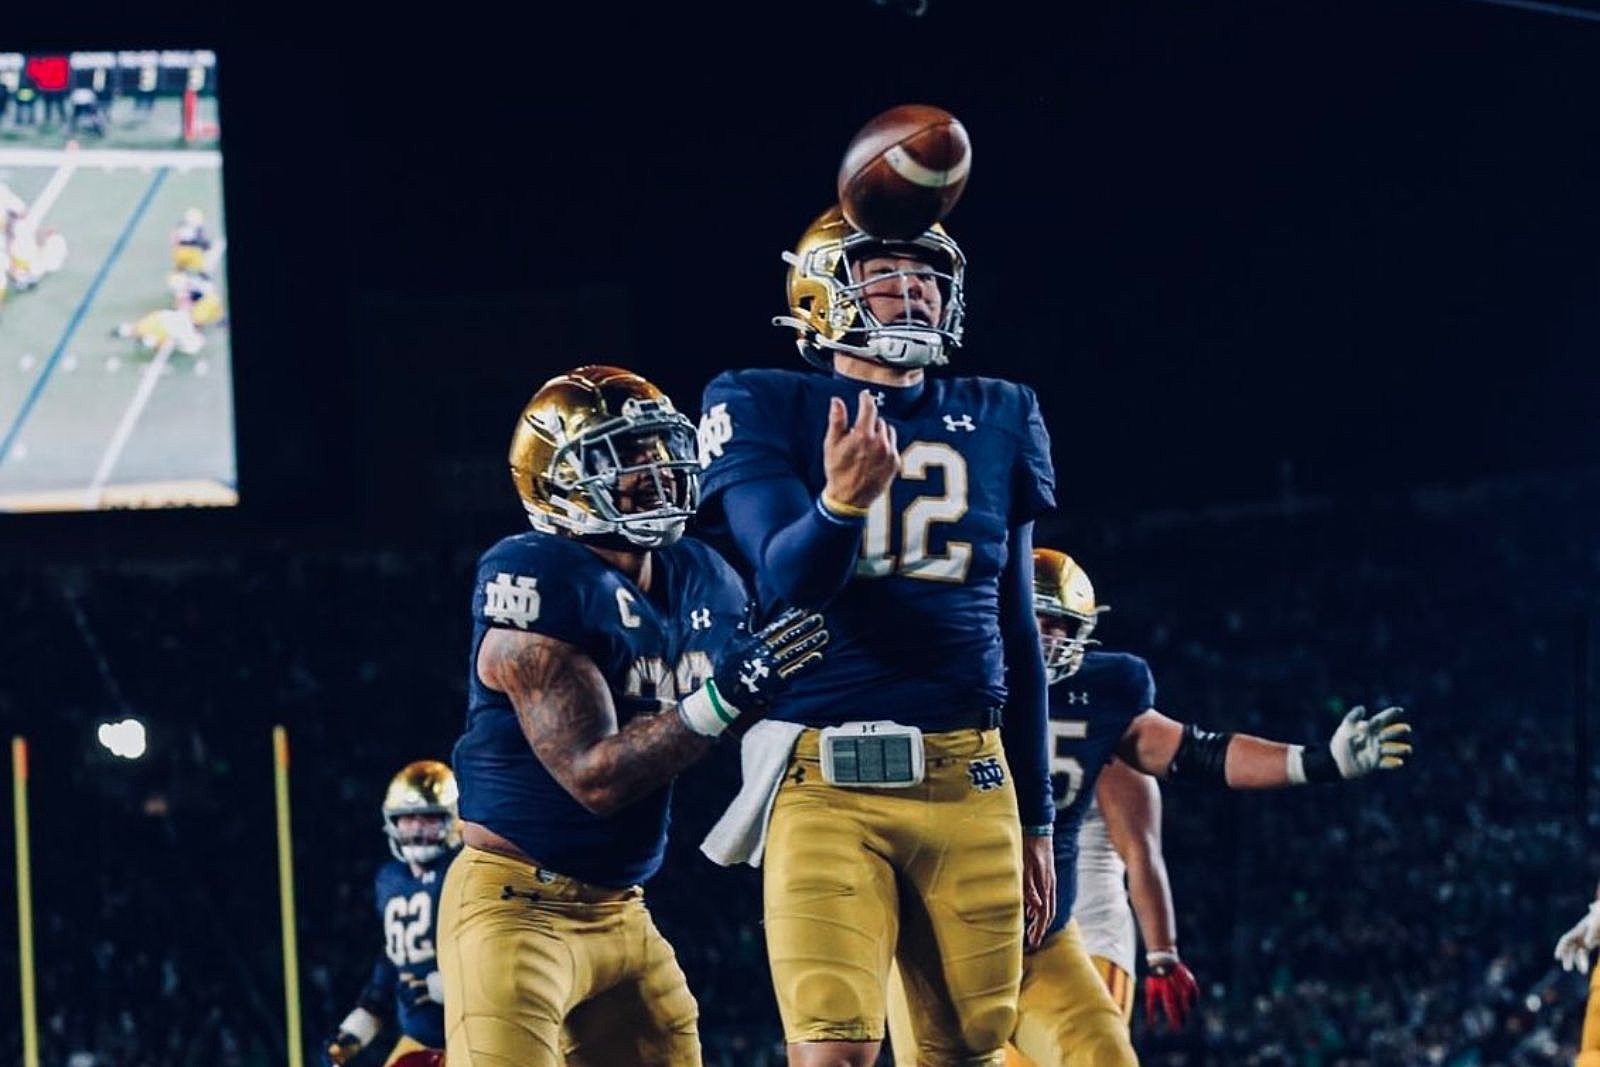 Notre Dame football eager to move past ugly win in visit to No. 25